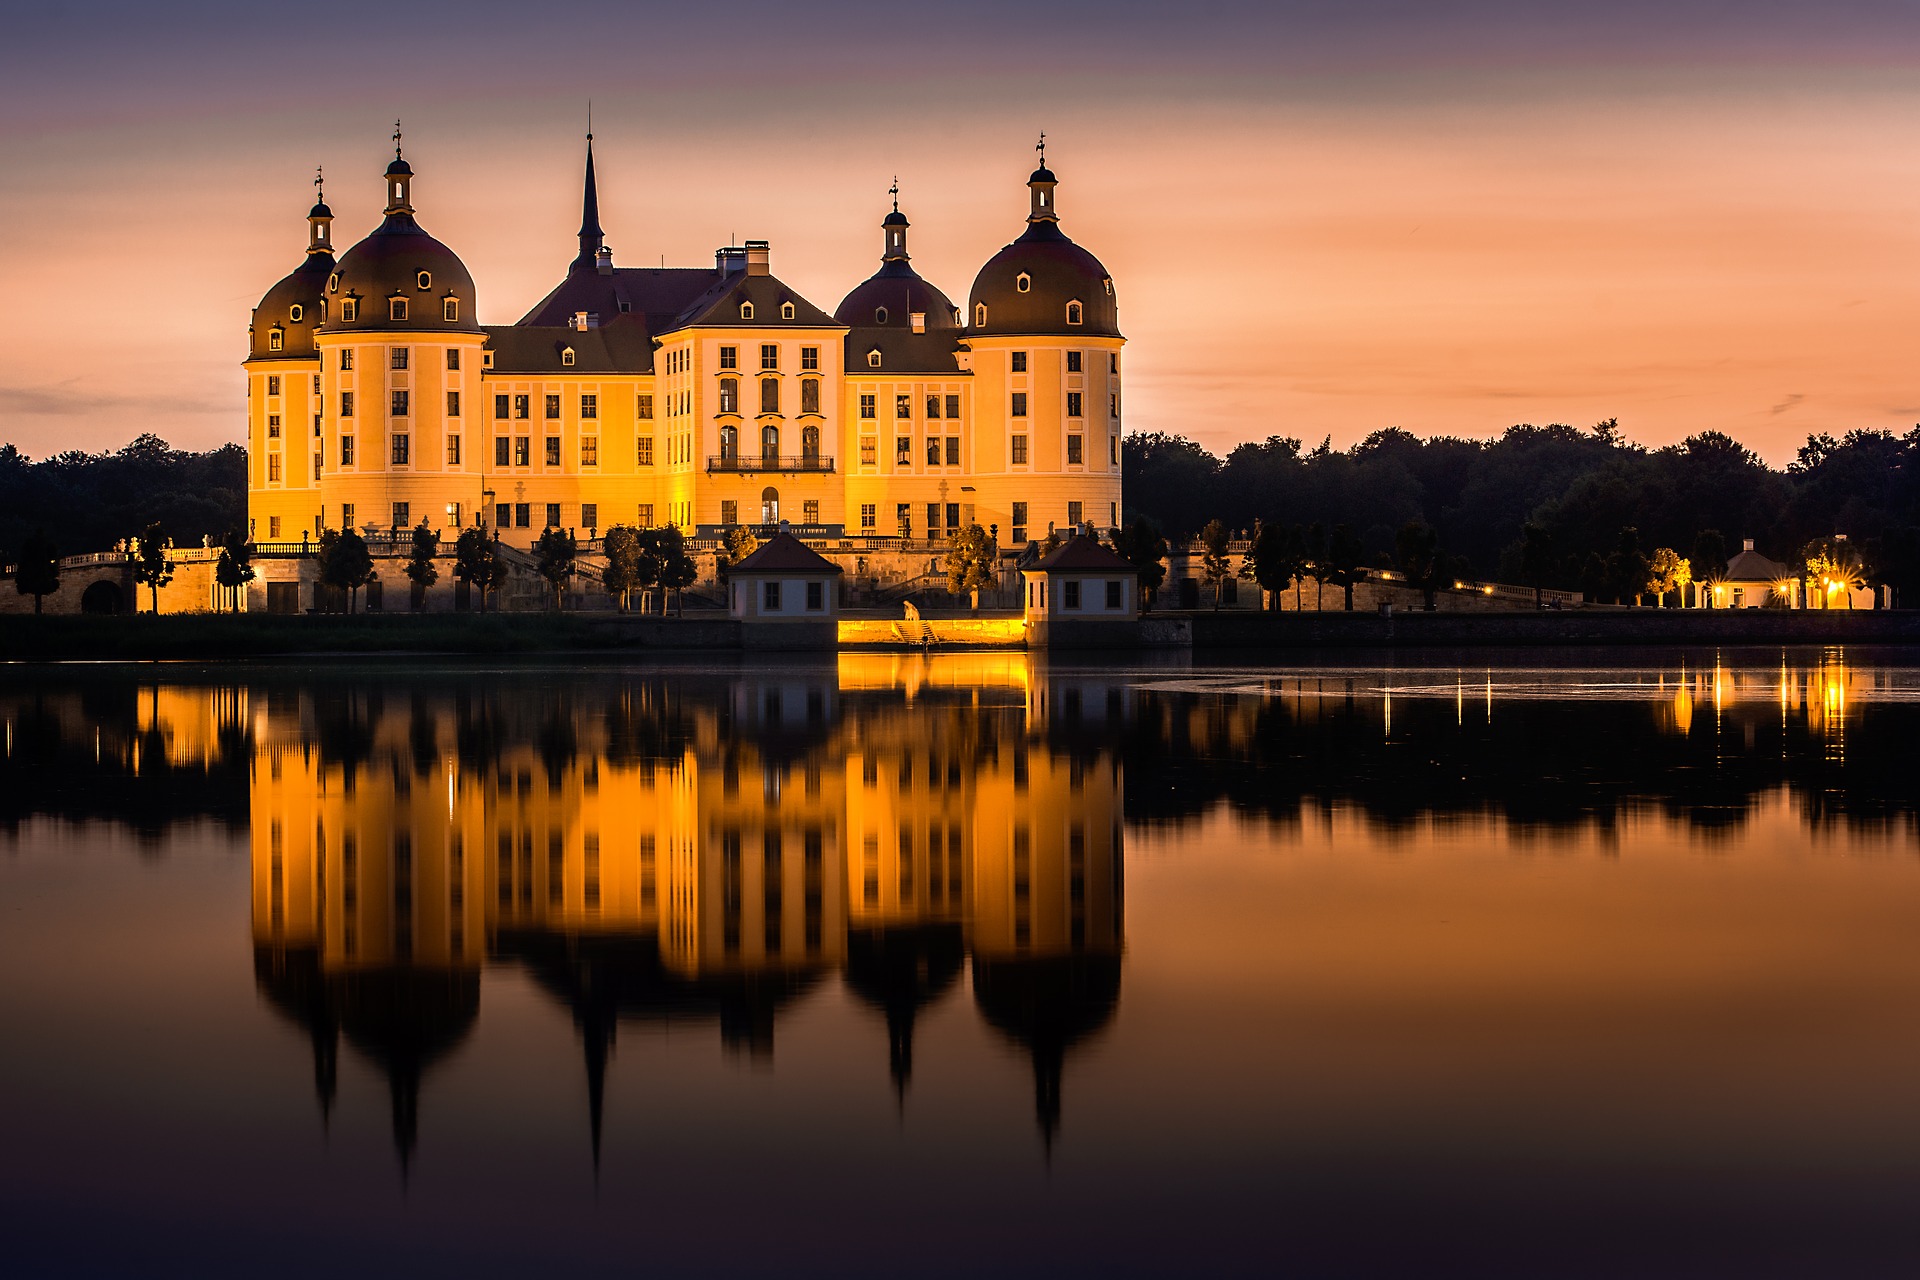 General 1920x1280 Moritzburg Castle Saxony Germany reflection architecture water trees evening castle